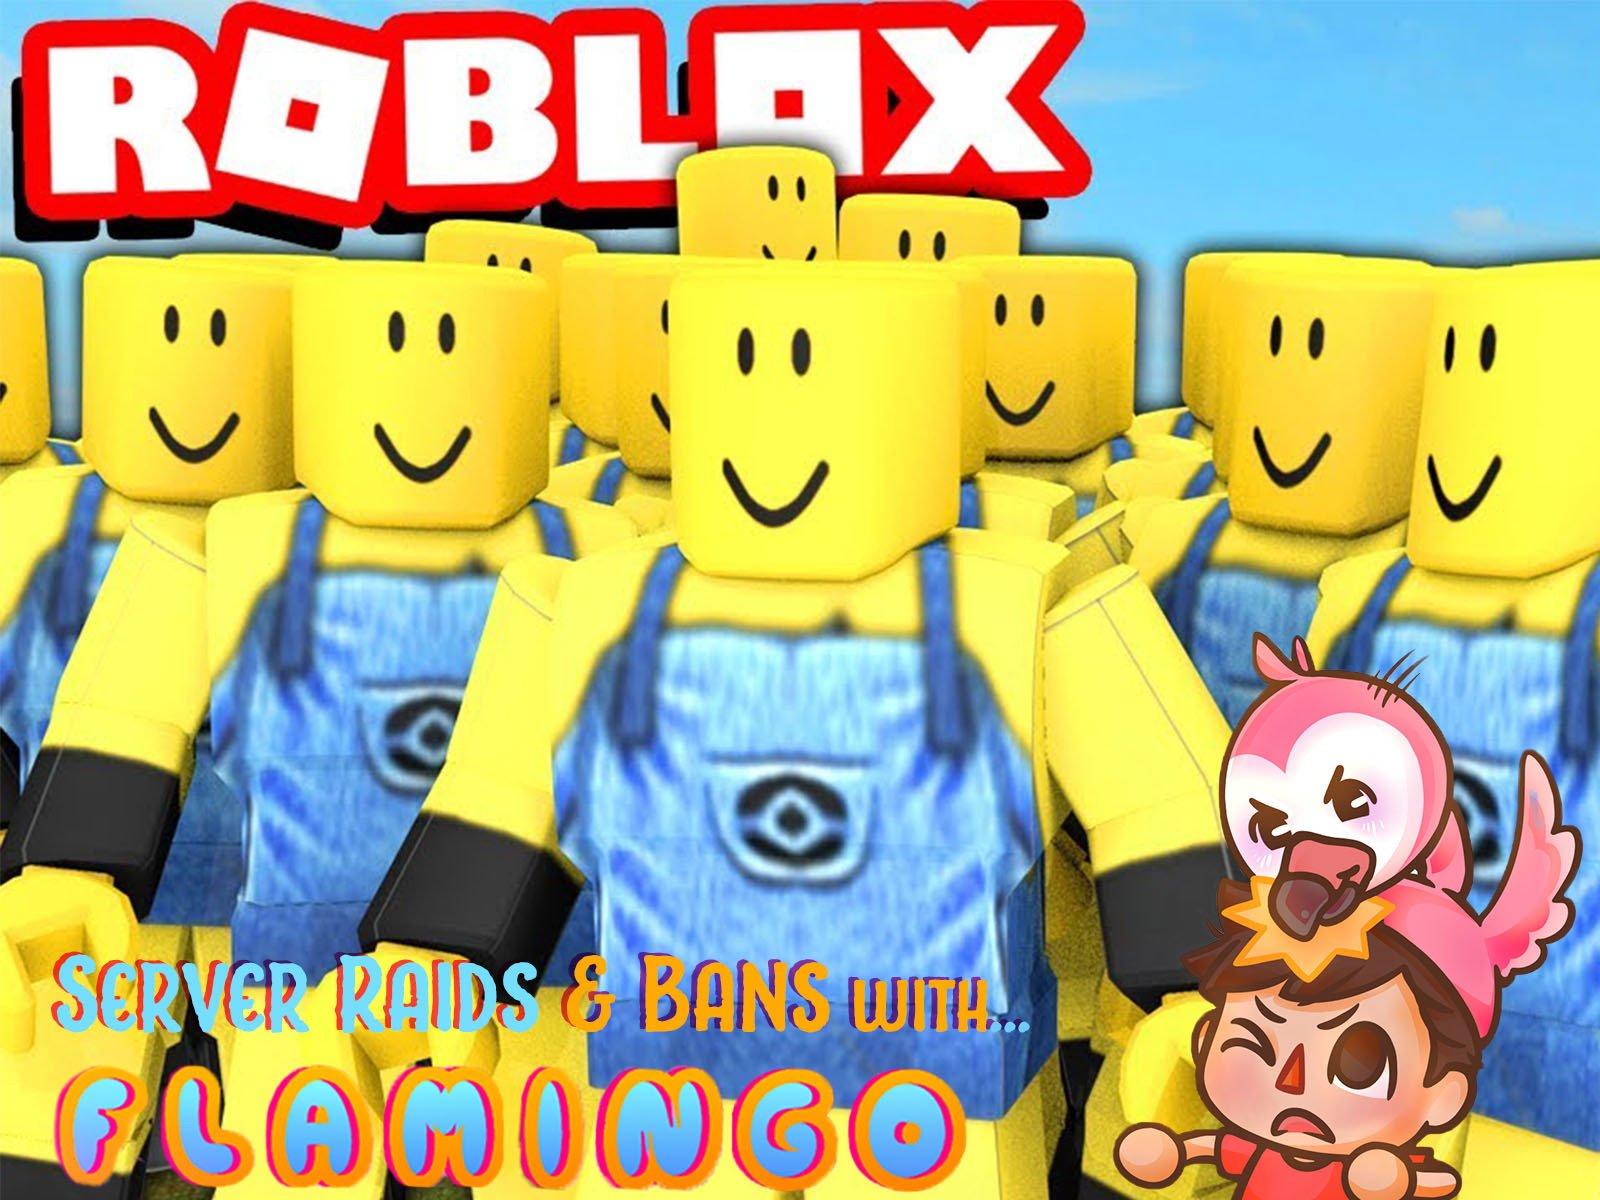 Funny roblox characters - flicksniom